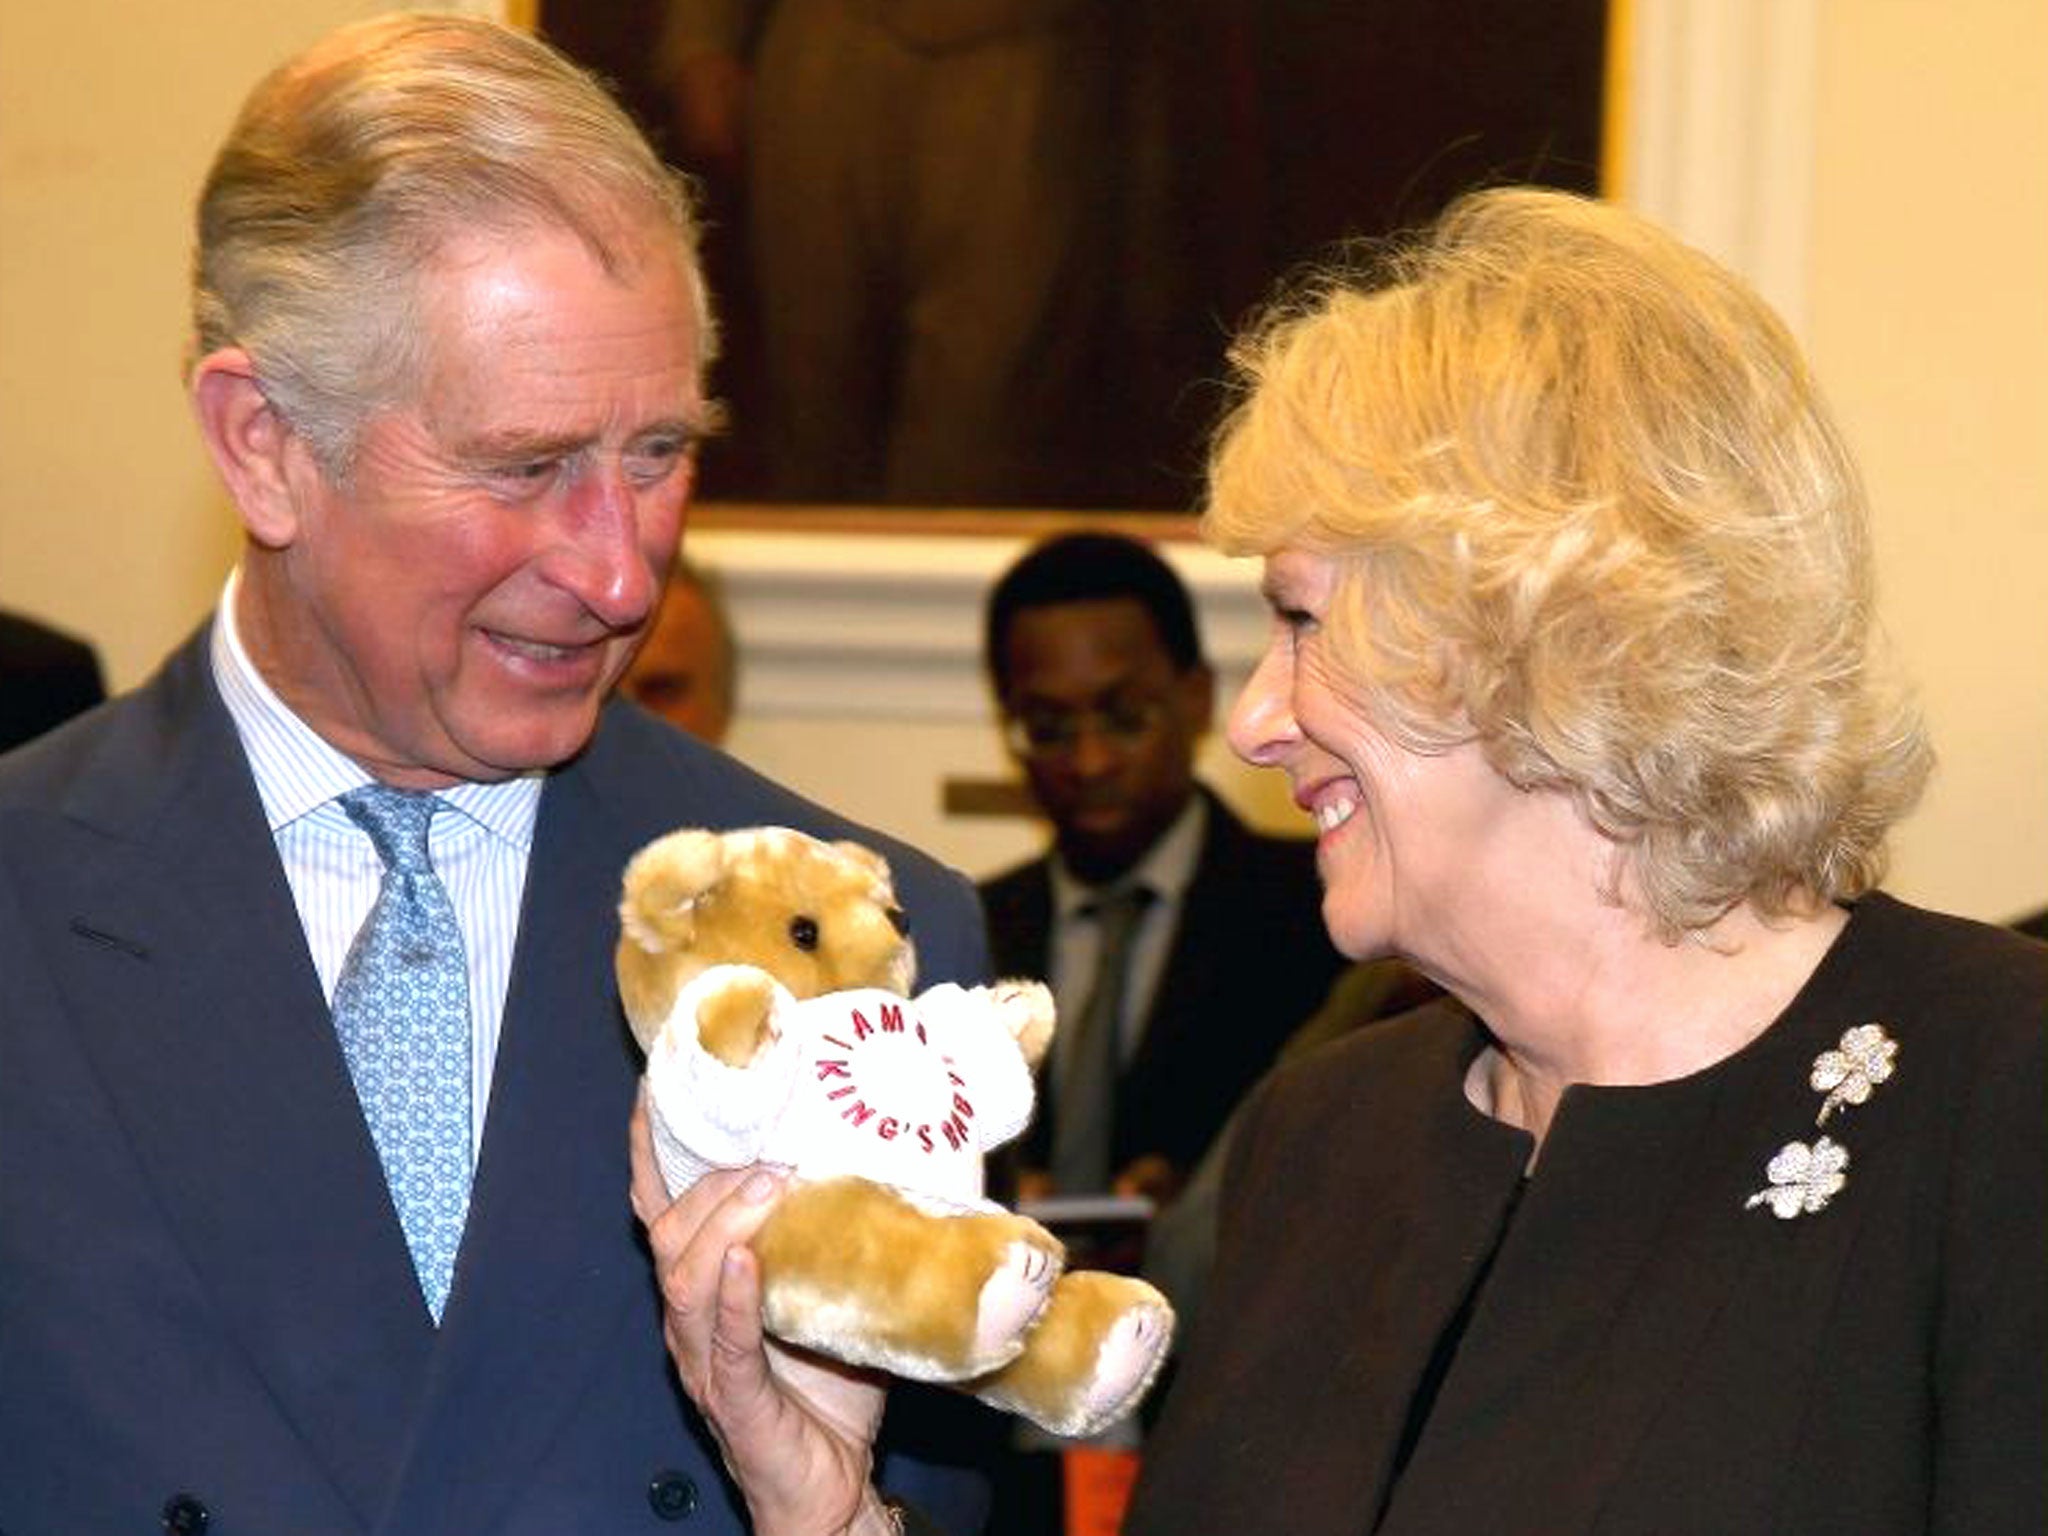 Camilla, Duchess of Cornwall holds an 'I'm a King's Baby' bear as Prince Charles, Prince of Wales looks on during an official visit to King's College Hospital in London